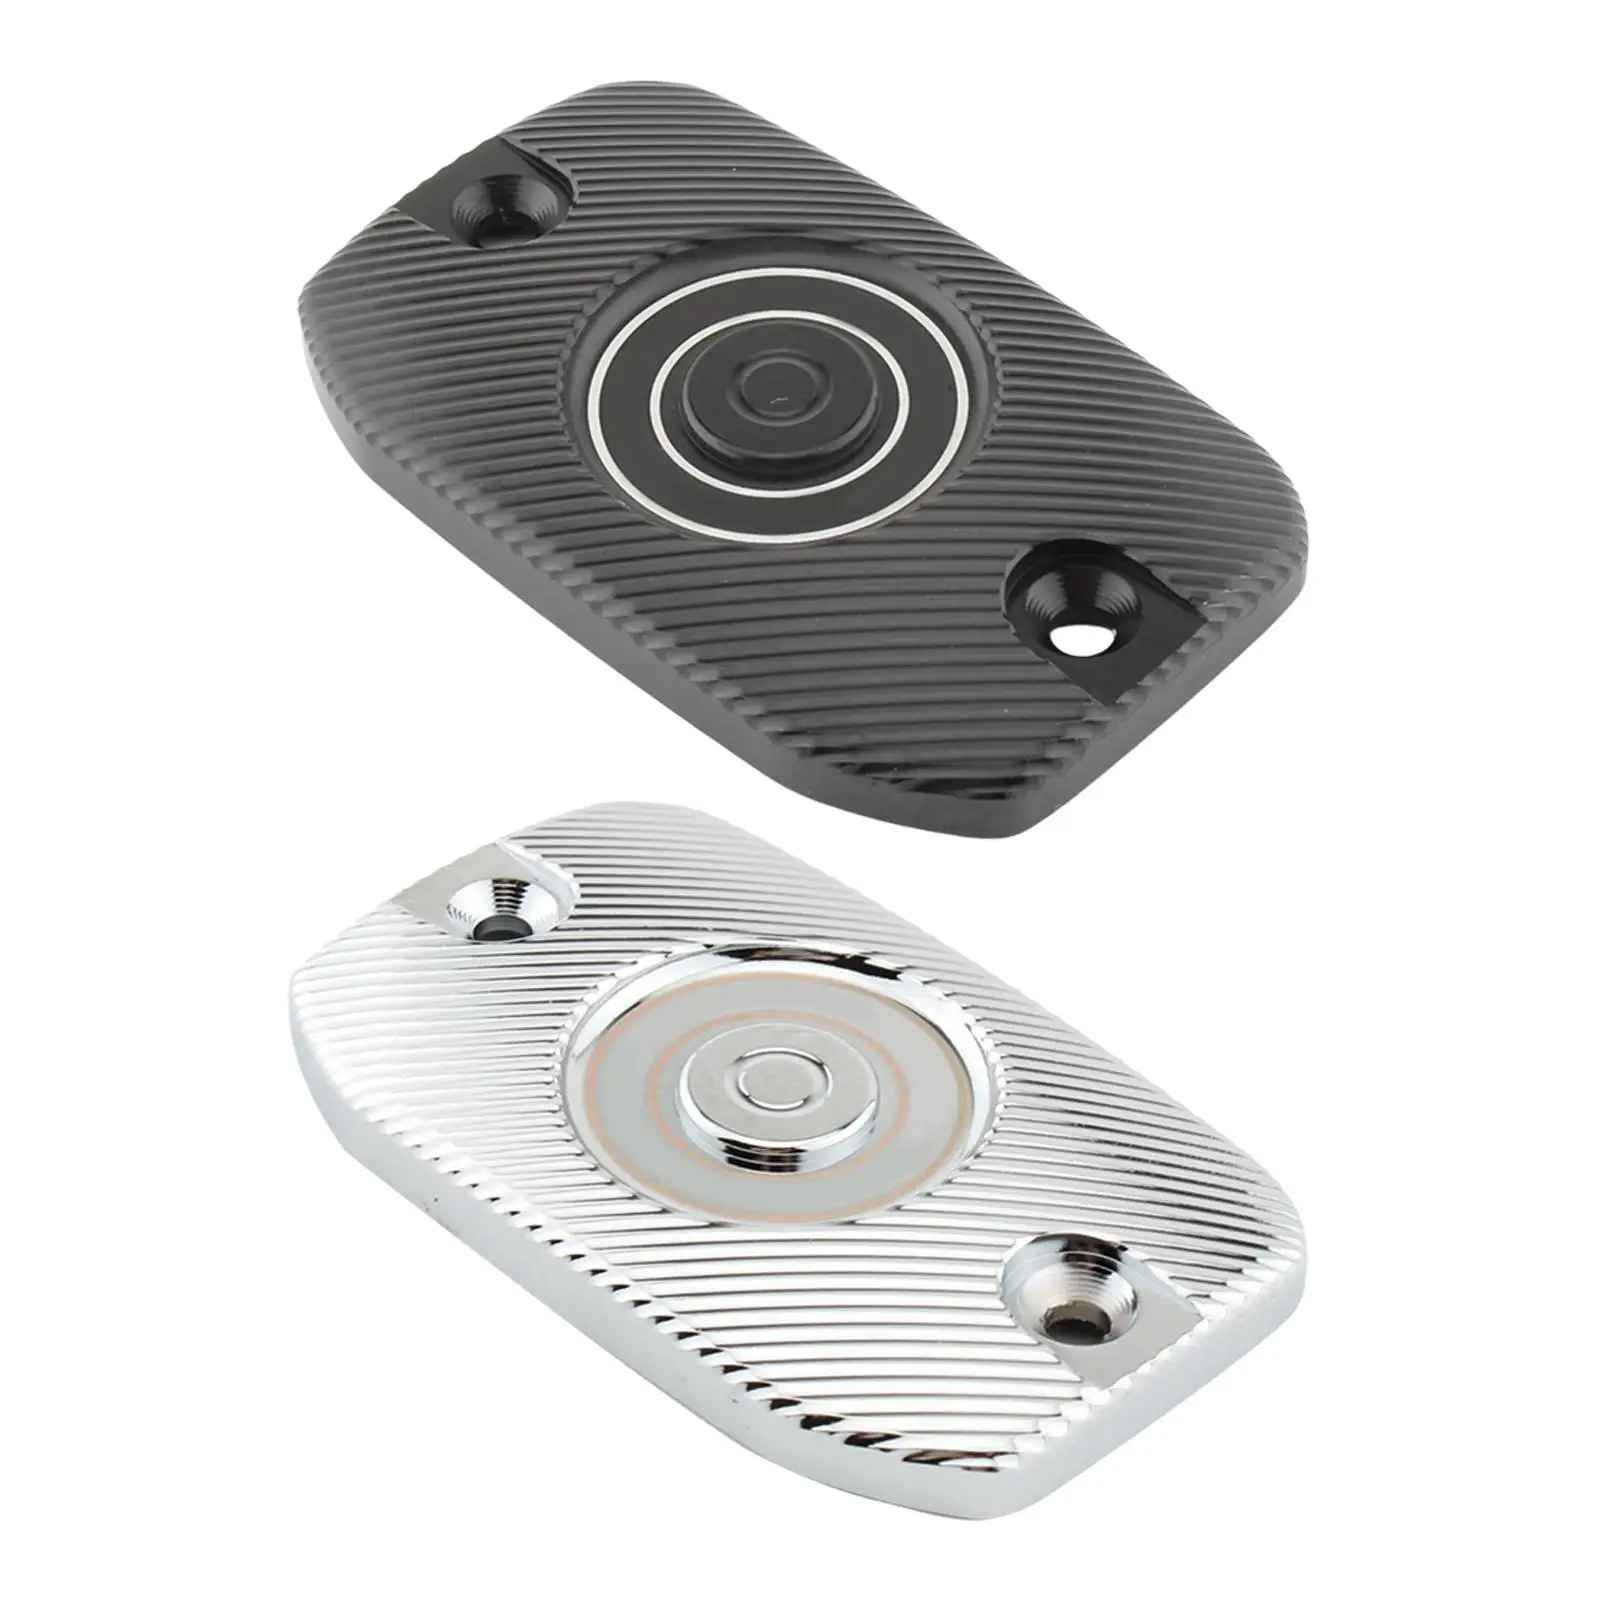 Motorcycle Brake Master Clutch Cylinder Cover Assembly for Harley x350